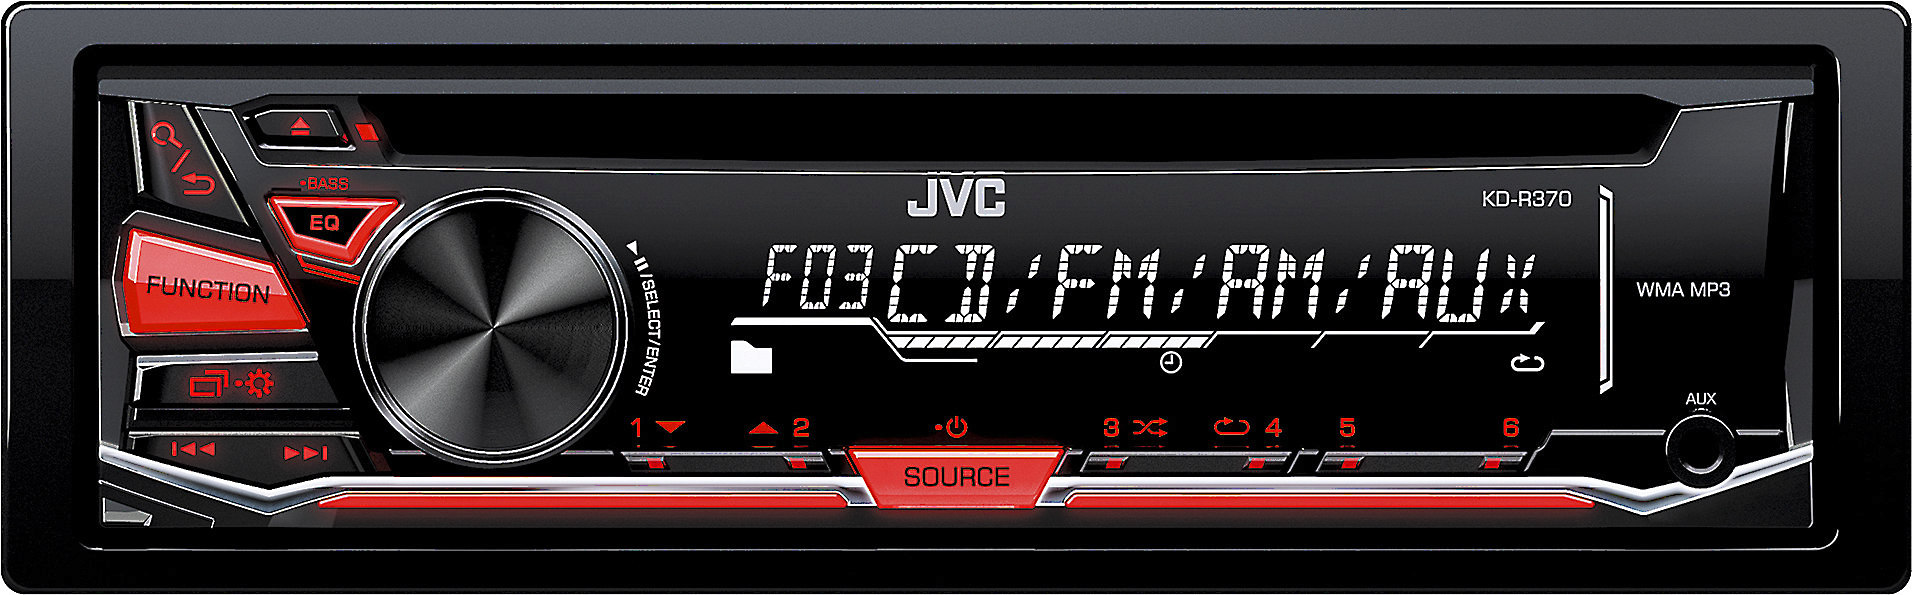 JVC 1-DIN Car Stereo CD Player Receiver with Aux in & Detachable FaceKD-R370 